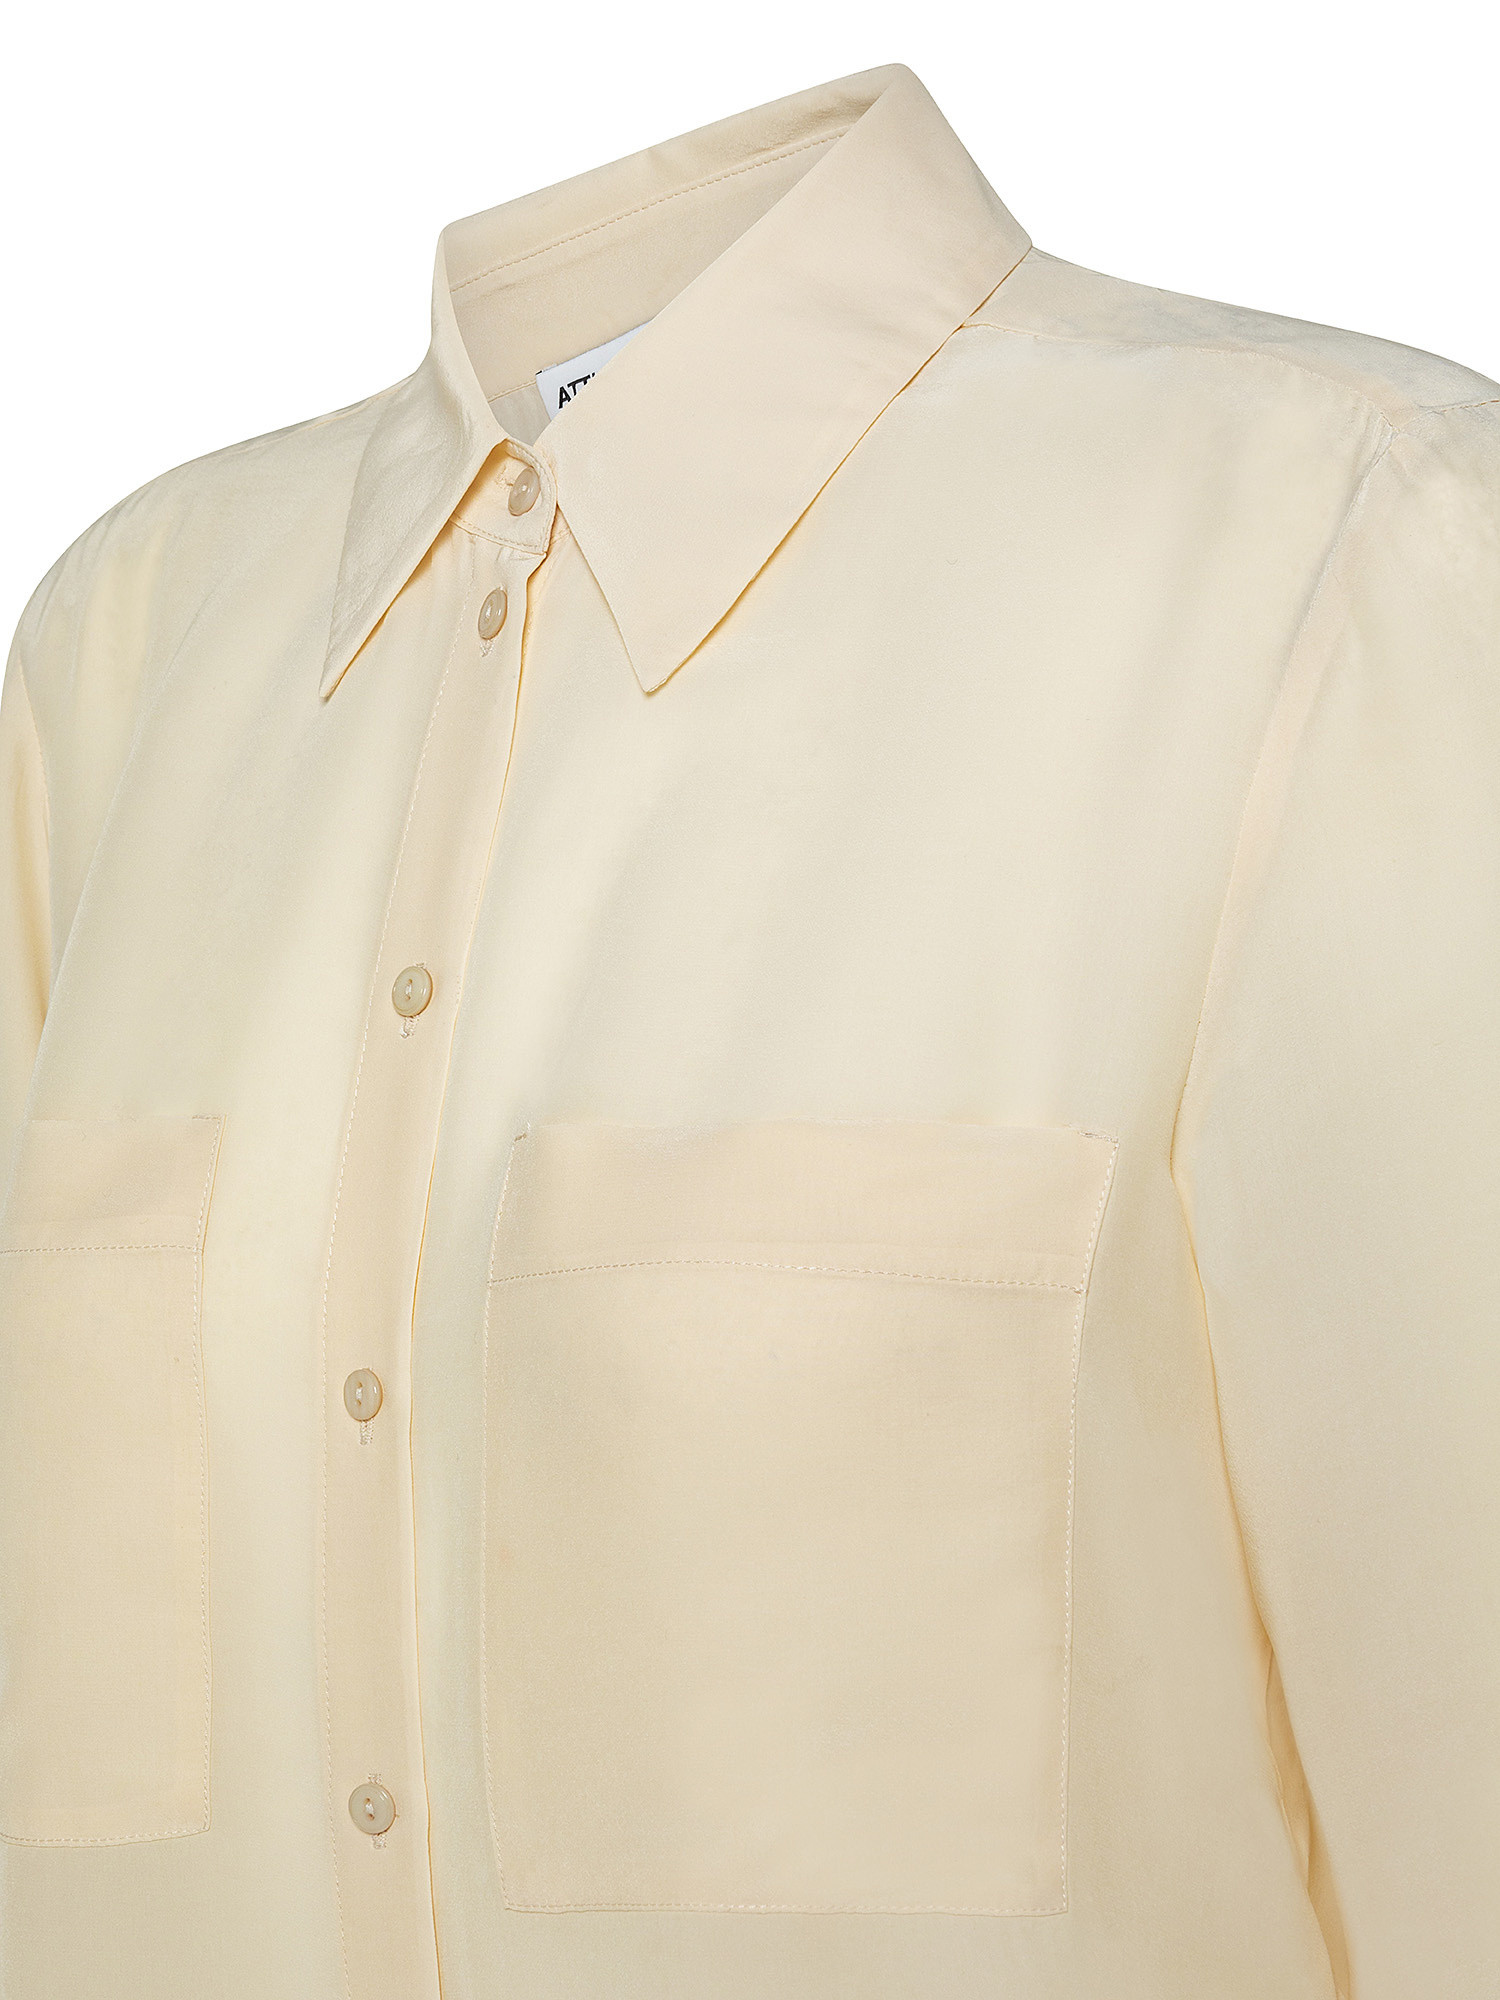 Shirt in silk viscose fabric, Beige, large image number 2